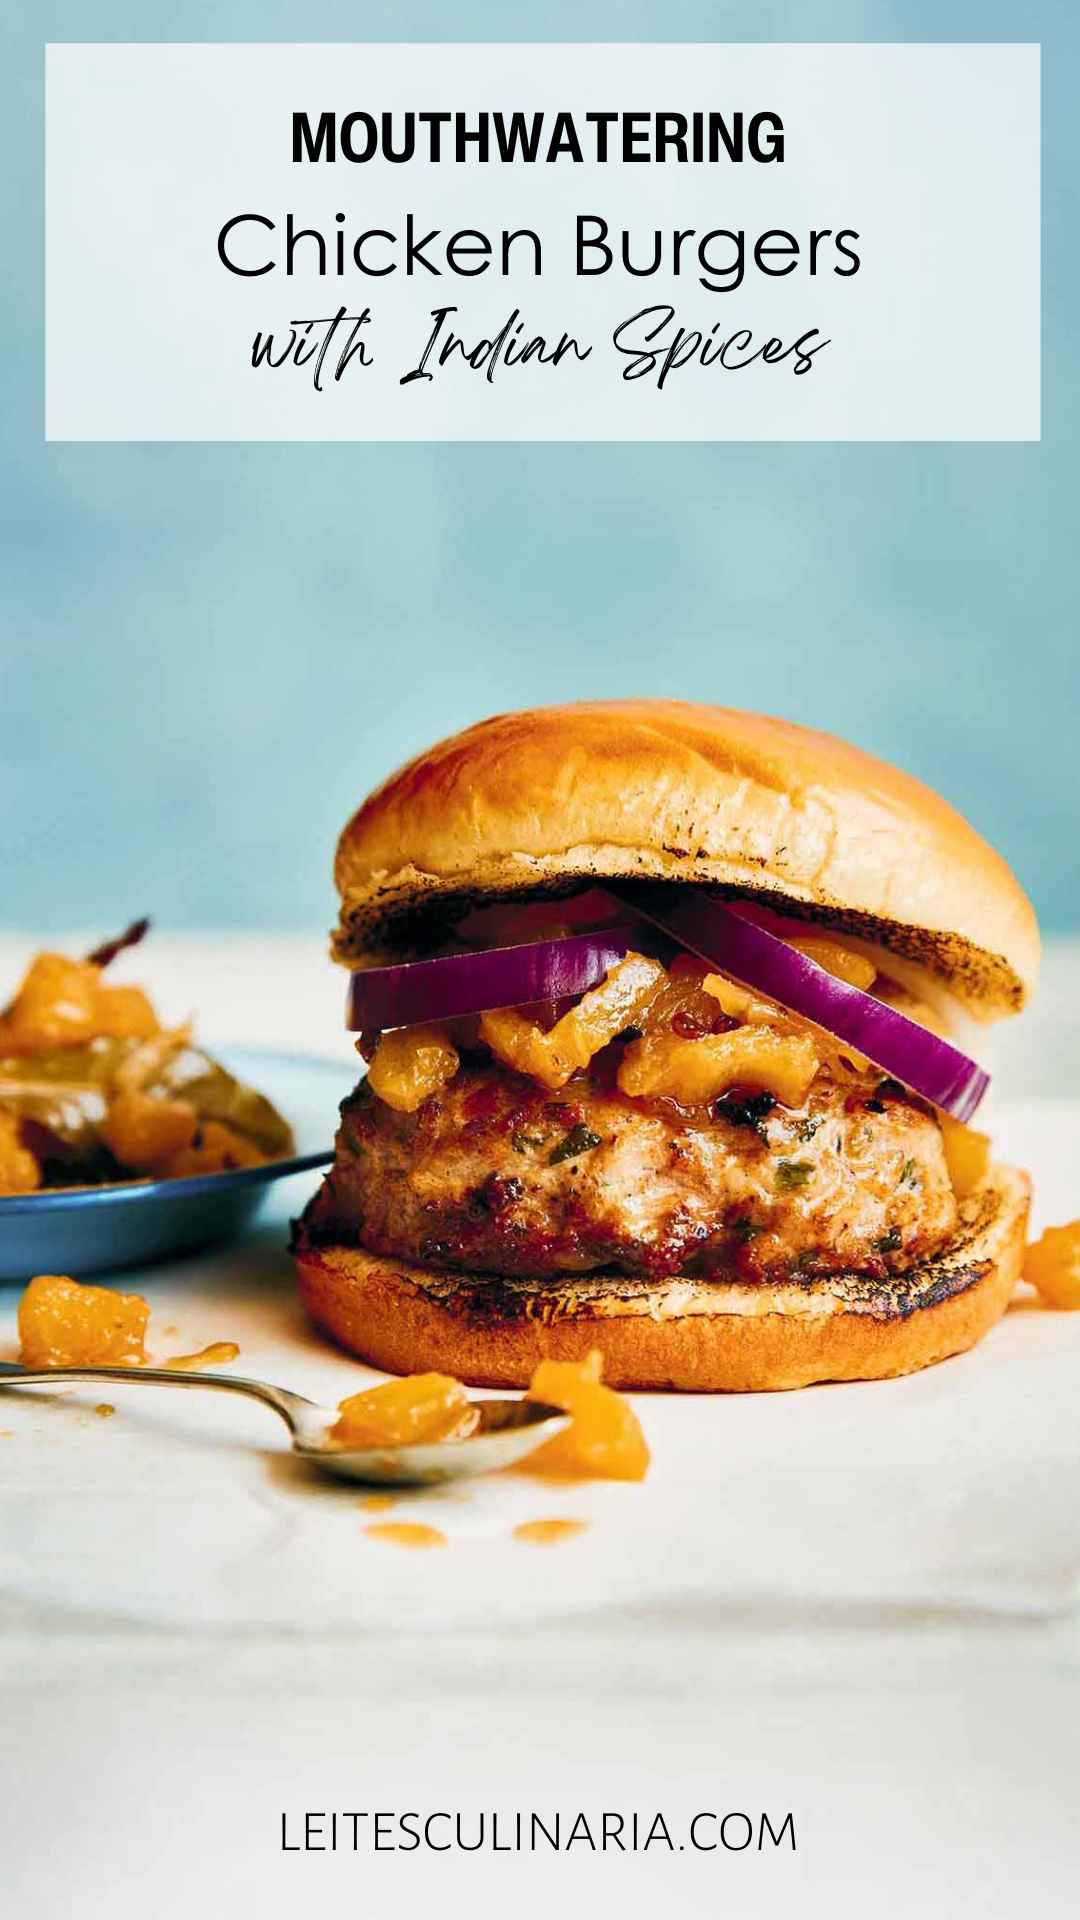 A ground chicken burger topped with red onion and chutney.